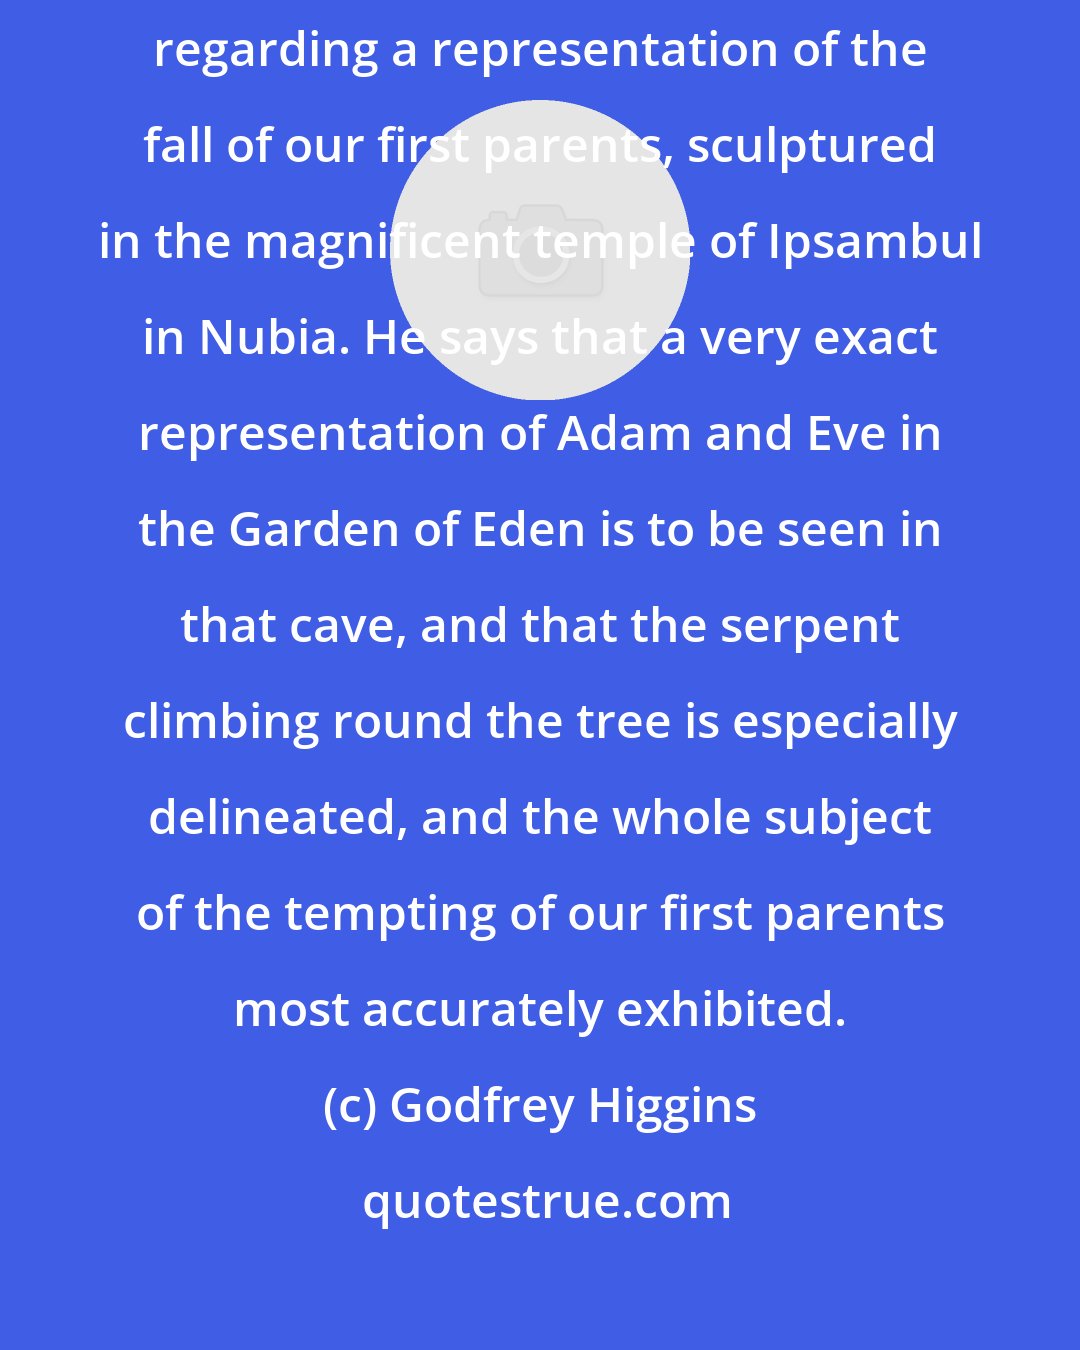 Godfrey Higgins: Another striding instance is recorded by the very intelligent traveler regarding a representation of the fall of our first parents, sculptured in the magnificent temple of Ipsambul in Nubia. He says that a very exact representation of Adam and Eve in the Garden of Eden is to be seen in that cave, and that the serpent climbing round the tree is especially delineated, and the whole subject of the tempting of our first parents most accurately exhibited.